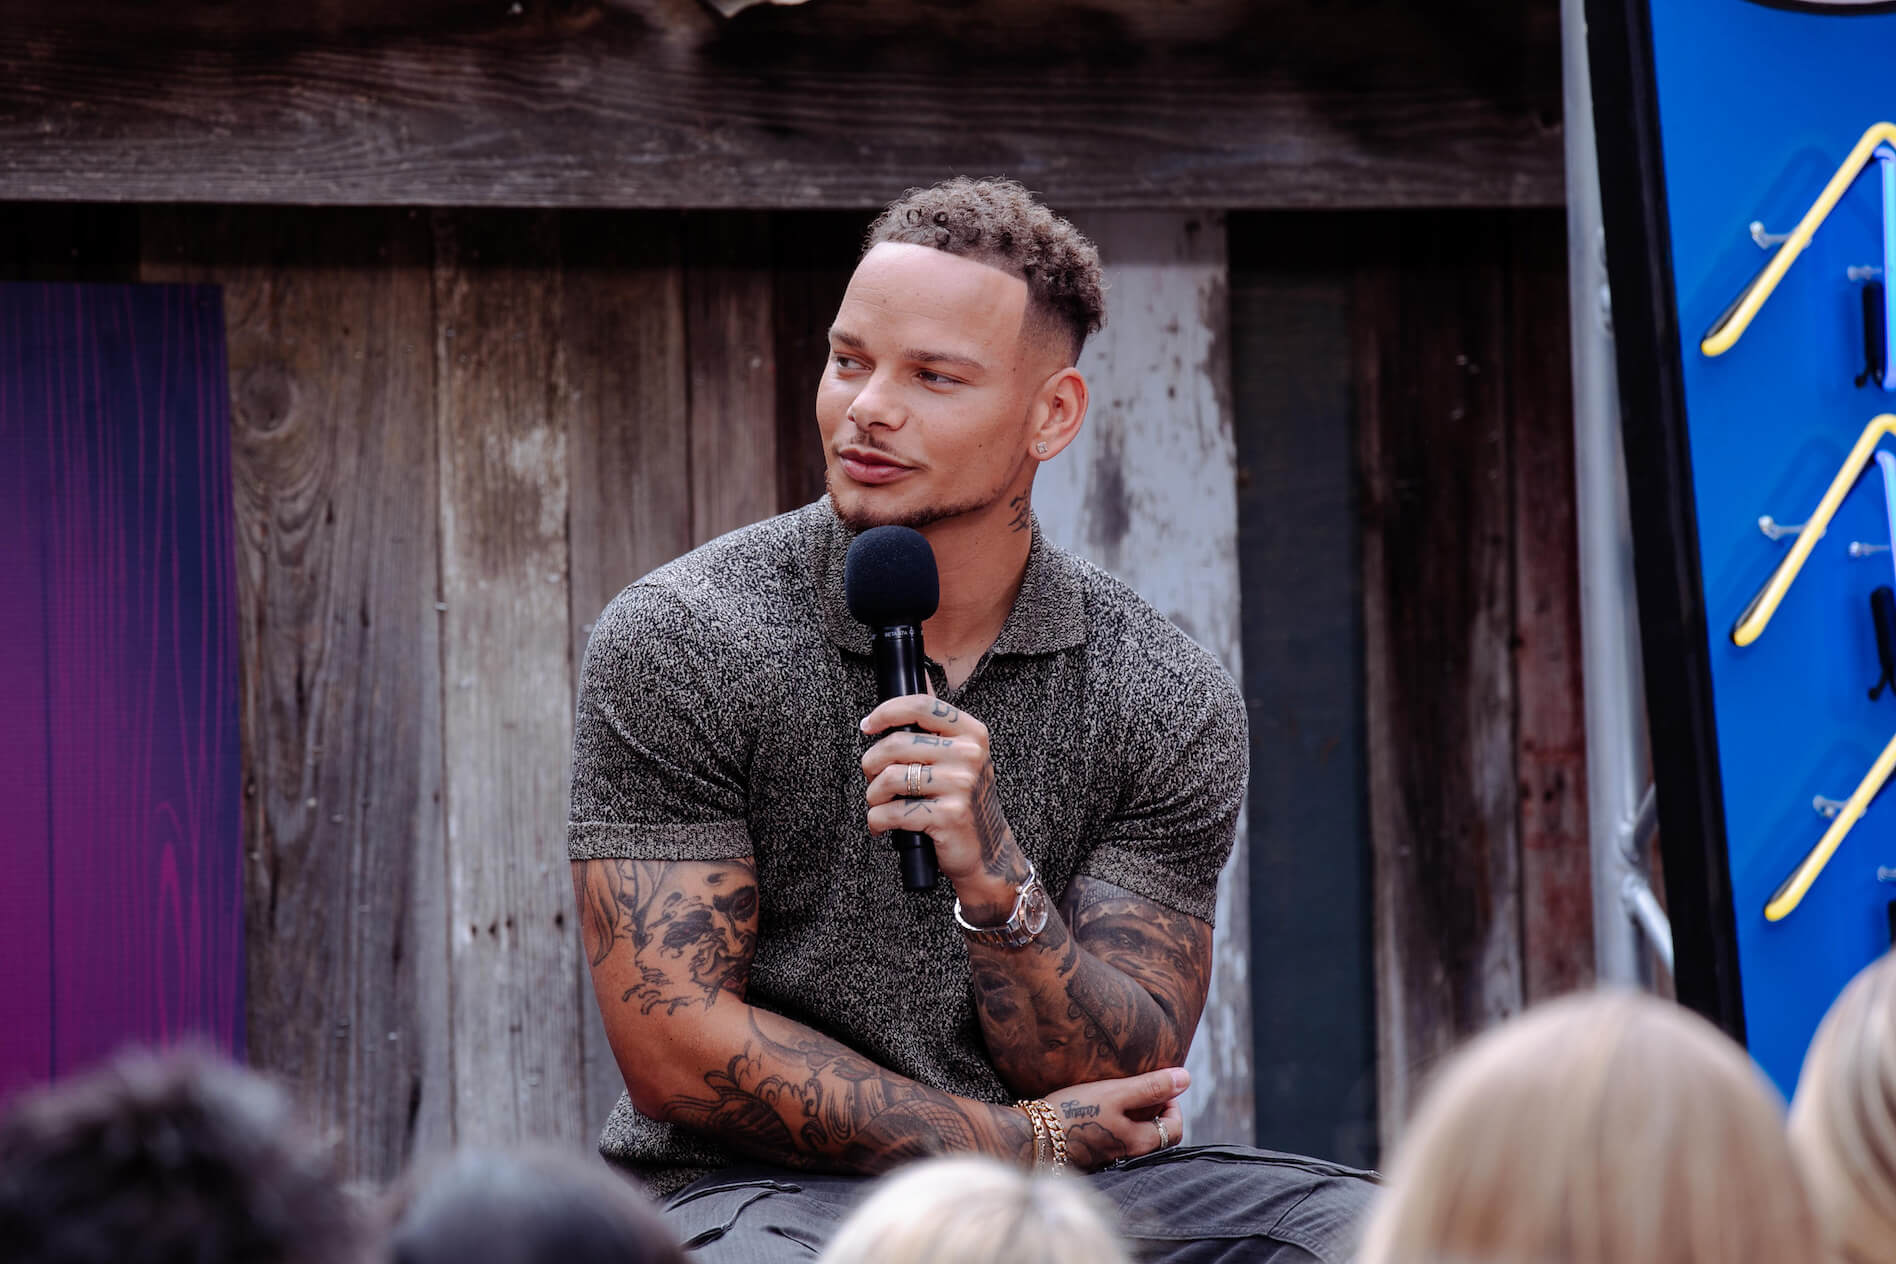 Country music singer Kane Brown holding a microphone while speaking. Kane Brown bought a house near Nashville, Tennessee